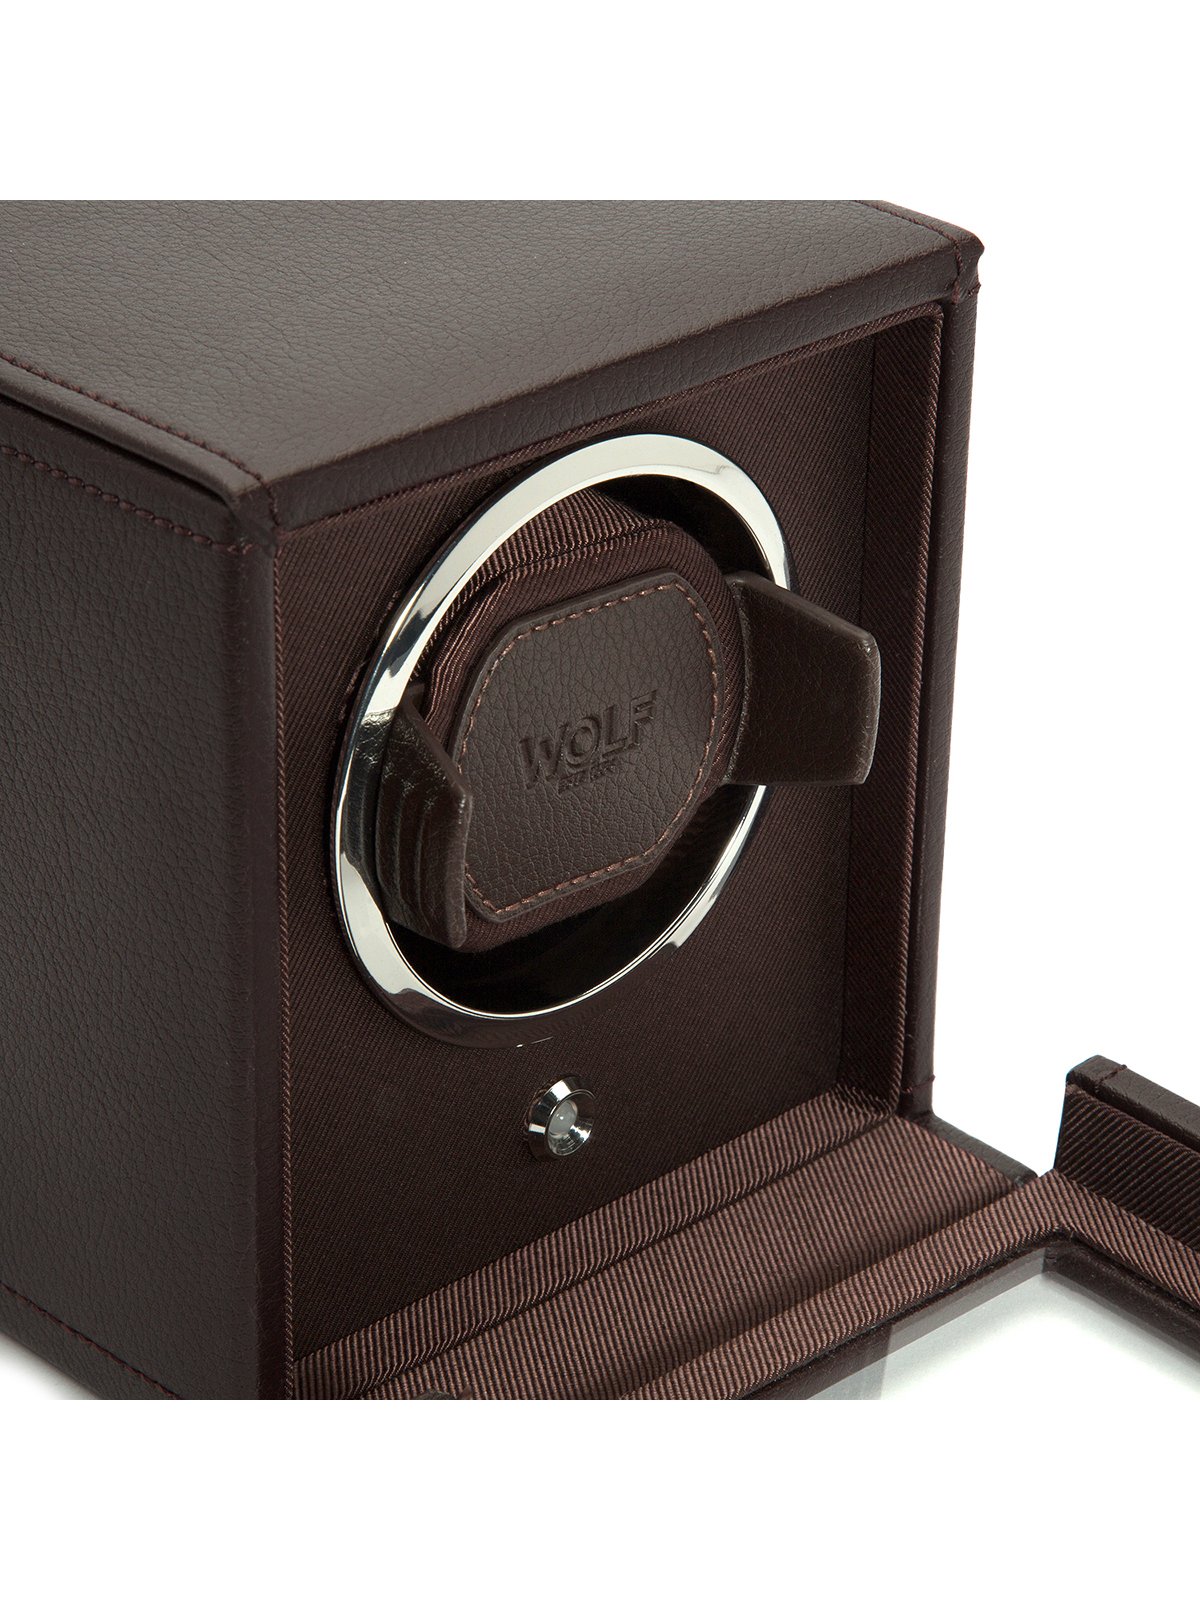 Wolf Cub Single Watch Winder with Cover in Brown 461106